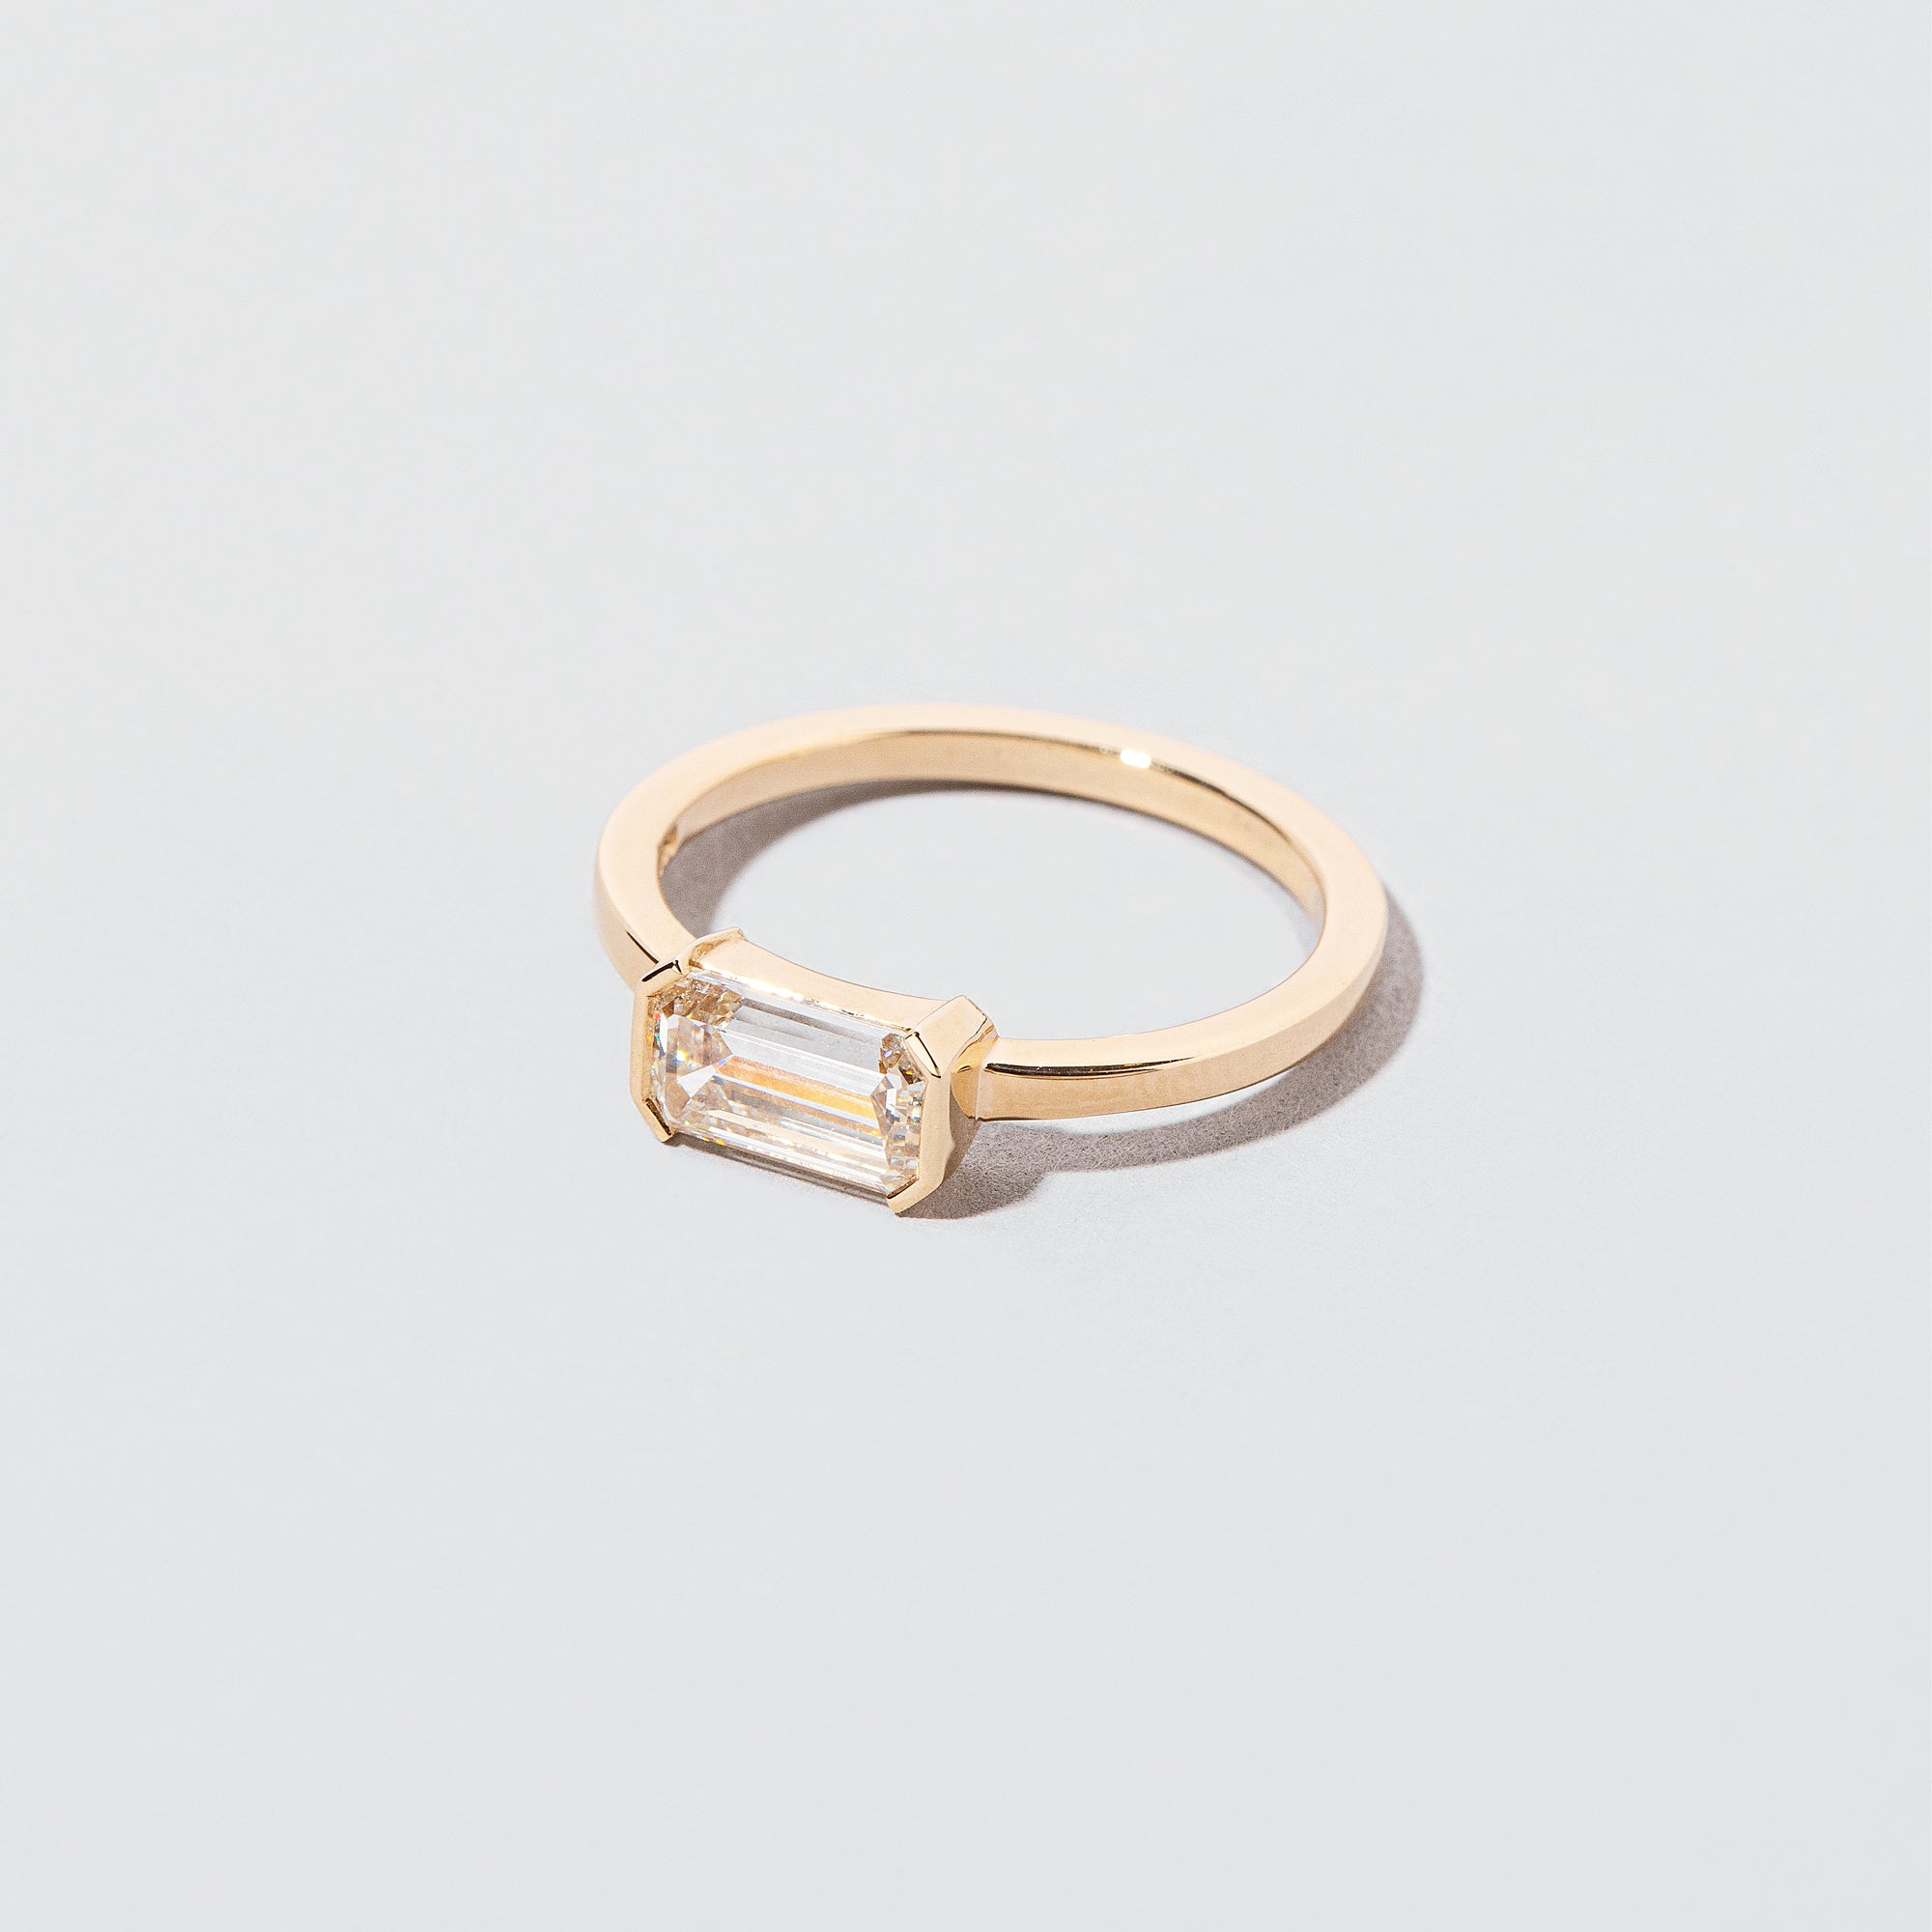 product_details:: Tethys Ring on light color background.